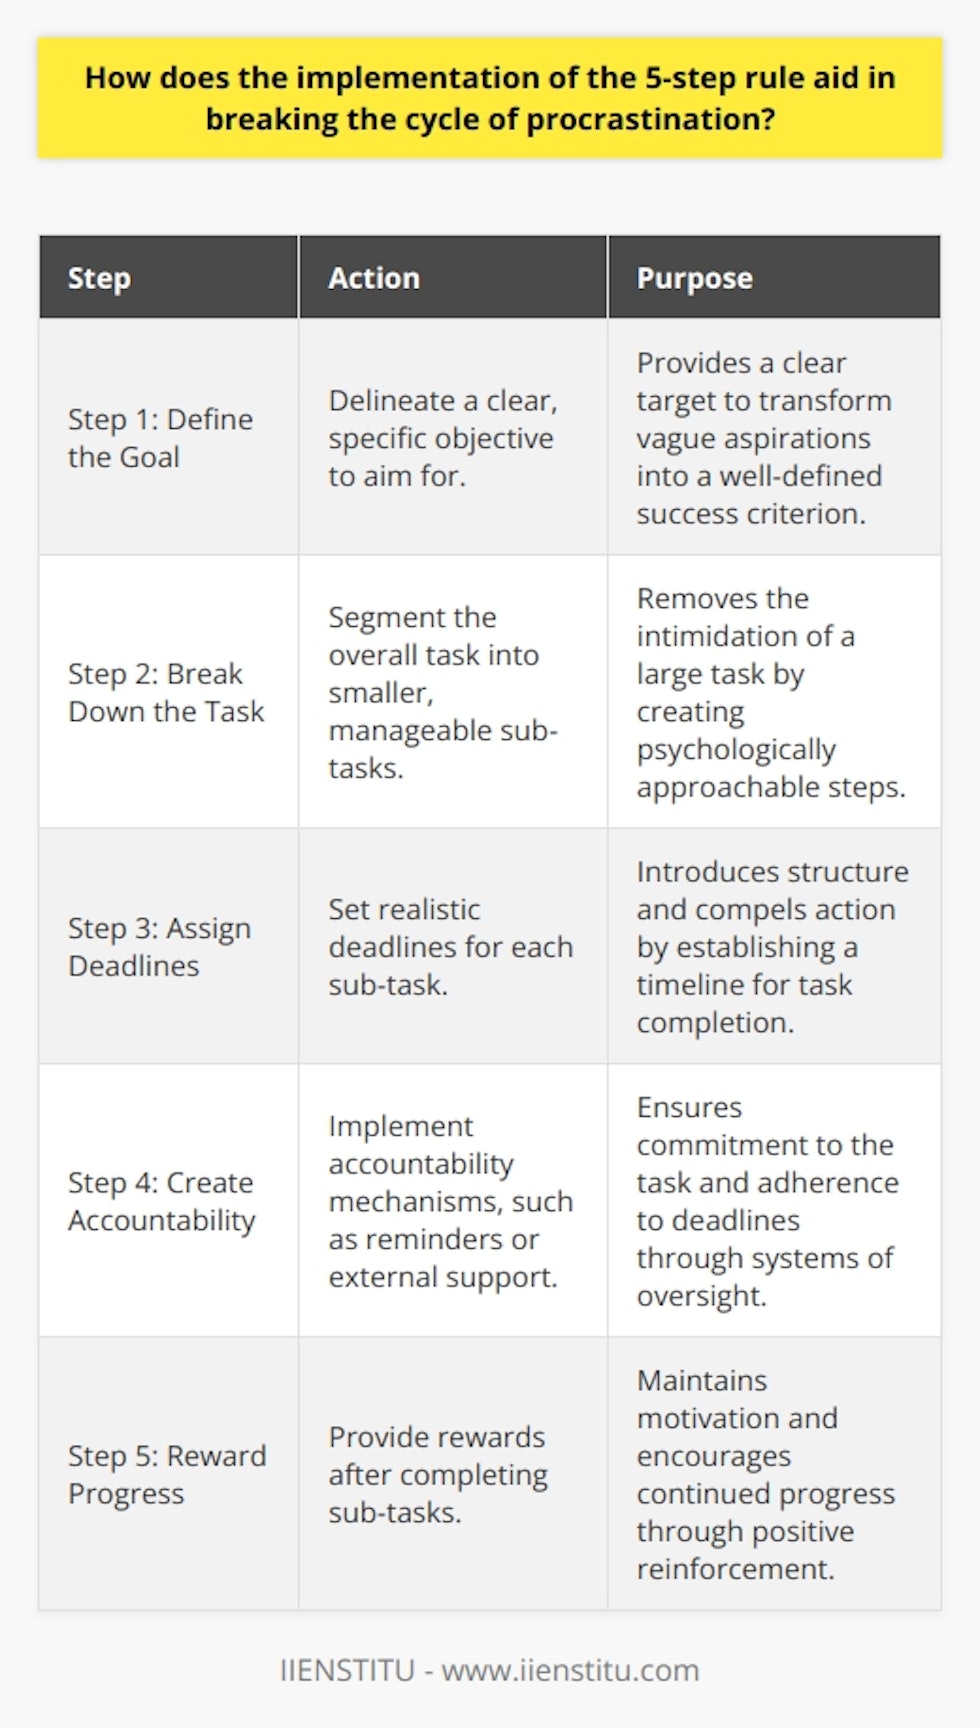 The 5-Step Rule is an effective methodology for overcoming the common habit of procrastination, which plagues many individuals in various aspects of their personal and professional lives. This structured approach allows people to not only initiate tasks but also see them through to completion.Step 1: Define the GoalTo effectively implement the 5-step rule, the first action is delineating the goal. This necessitates a precise understanding of what you hope to achieve. Clarification of your end objective provides you with a target, transforming nebulous intentions into a well-defined delineation of what success looks like.Step 2: Break Down the TaskThe second step involves deconstructing the overarching task into smaller, more digestible sub-tasks. This segmentation process is critical, as it can demystify what might initially appear as an insurmountable undertaking. These bite-sized pieces are psychologically less intimidating and more approachable.Step 3: Assign DeadlinesOnce the task is divided into sub-tasks, the next step is assigning realistic deadlines to each segment. This adds structure and a timeline for completion, compelling action. Deadlines serve as commitment devices, fortifying one's resolve to move forward with the work at hand, and help prioritize what needs to be addressed first.Step 4: Create AccountabilityThe fourth step necessitates establishing mechanisms of accountability. This can be achieved through a variety of ways such as setting up reminders, utilizing project management tools, or enlisting the help of peers or mentors who can provide external pressure to stick to the established deadlines.Step 5: Reward ProgressFinally, the 5-step rule emphasizes the importance of recognizing and rewarding progress. Offering oneself small rewards upon the completion of each sub-task can rejuvenate your drive and enthusiasm. Positive reinforcement ensures that motivation is maintained throughout the process.By segmenting tasks into manageable steps, prioritizing them with deadlines, enforcing accountability through systems or relationships, and celebrating small victories, the 5-step rule methodically dissolves the pattern of delay and avoidance that characterizes procrastination. It is a practical solution that utilizes cognitive-behavioral principles to modify behavior patterns, designed to promote action over inaction, and adherence to a structured plan over succumbing to the allure of procrastination.